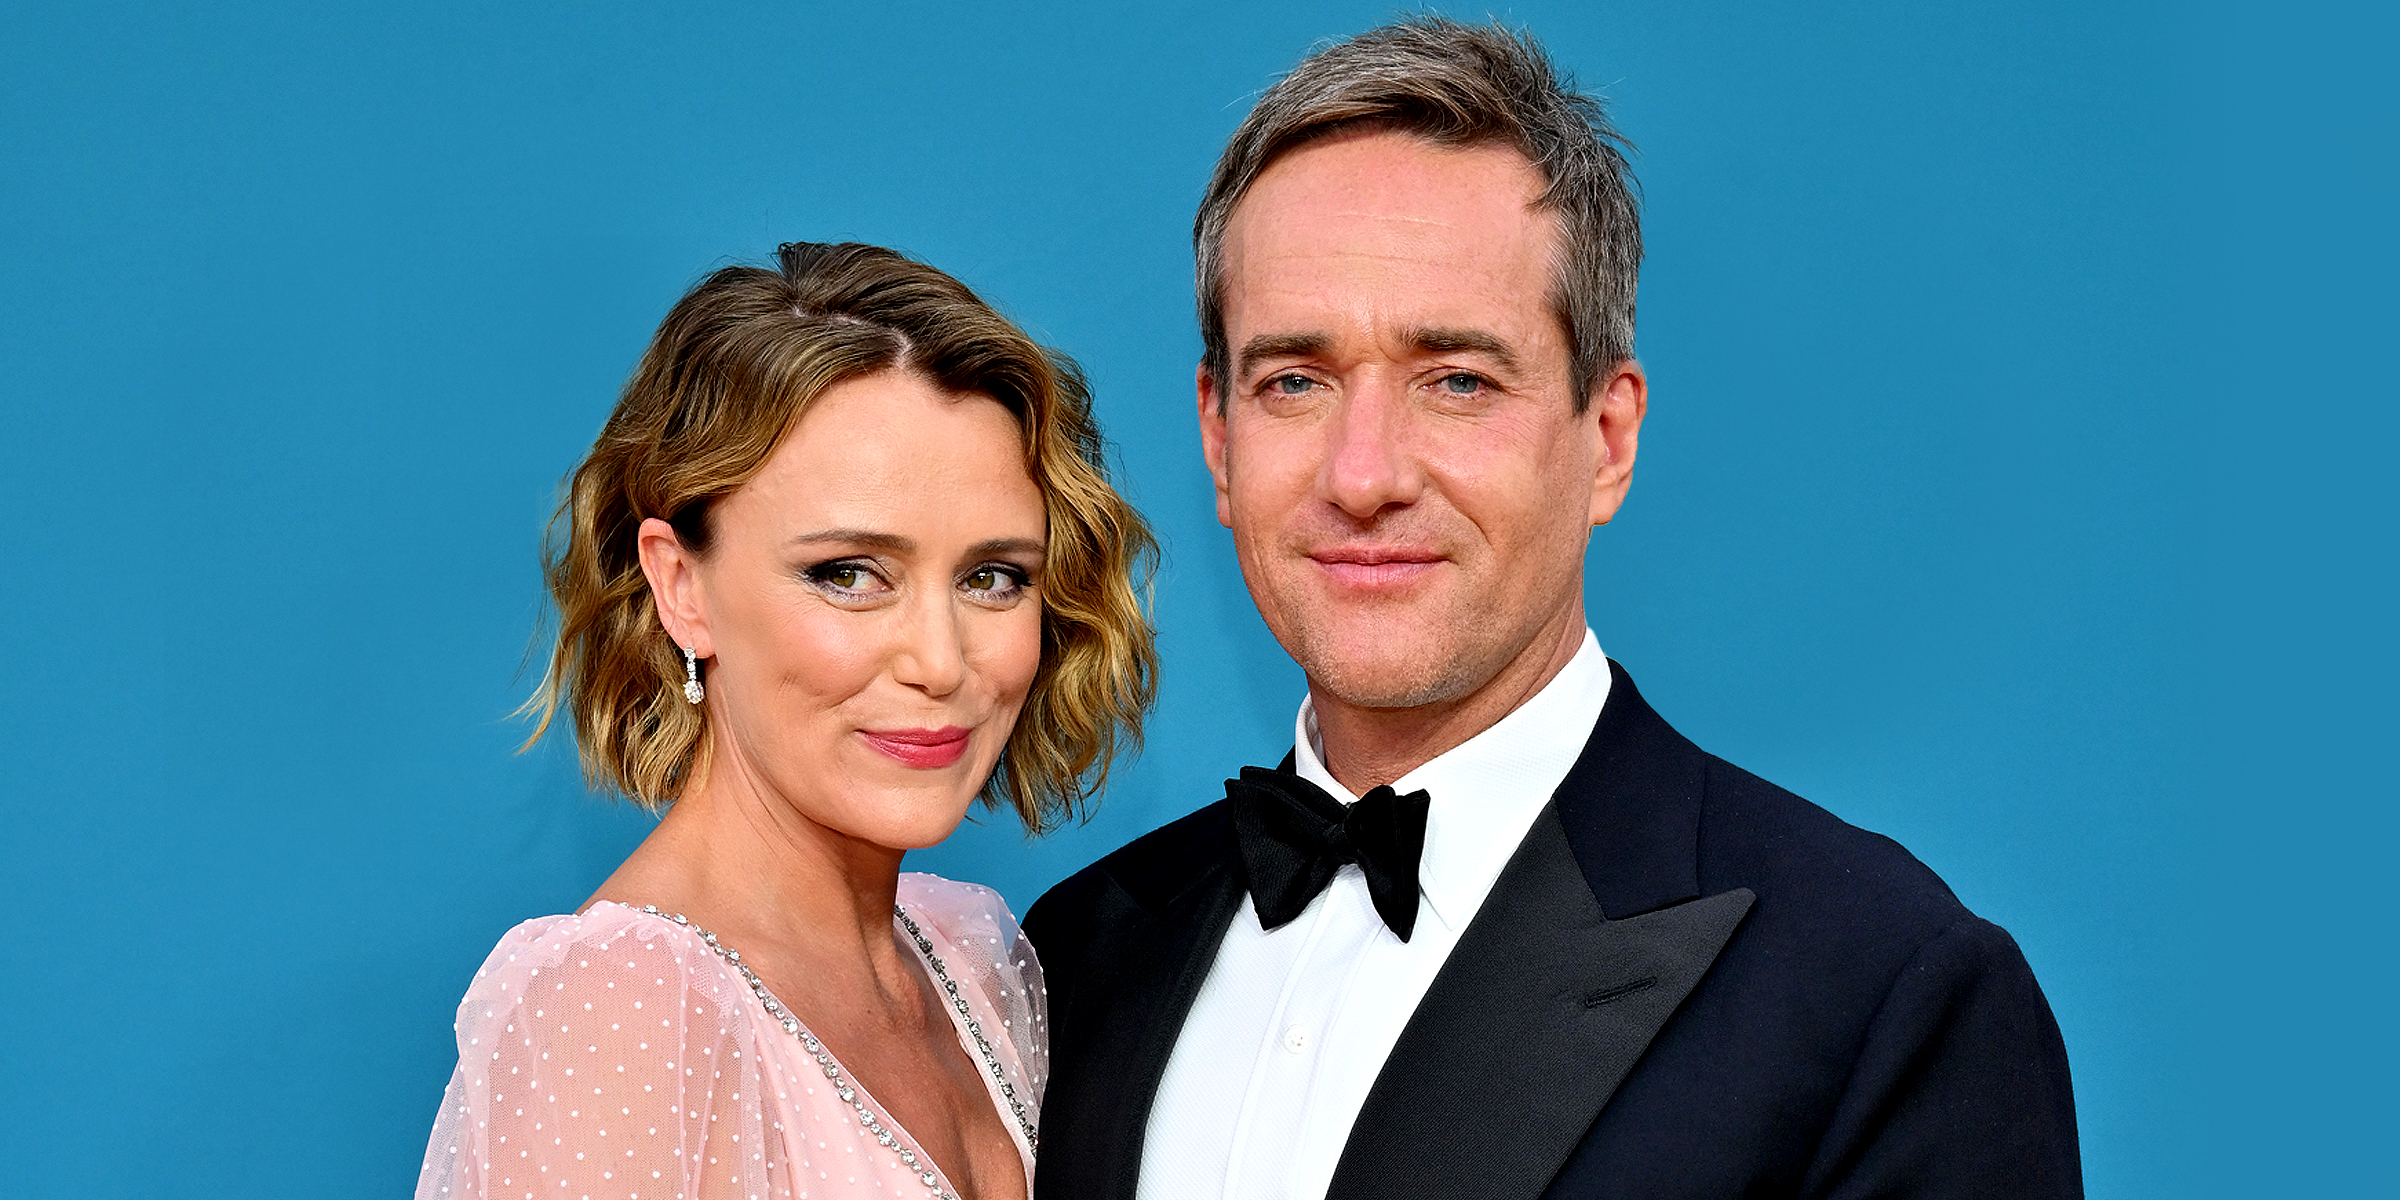 Keeley Hawes and Matthew Macfadyen | Source: Getty Images